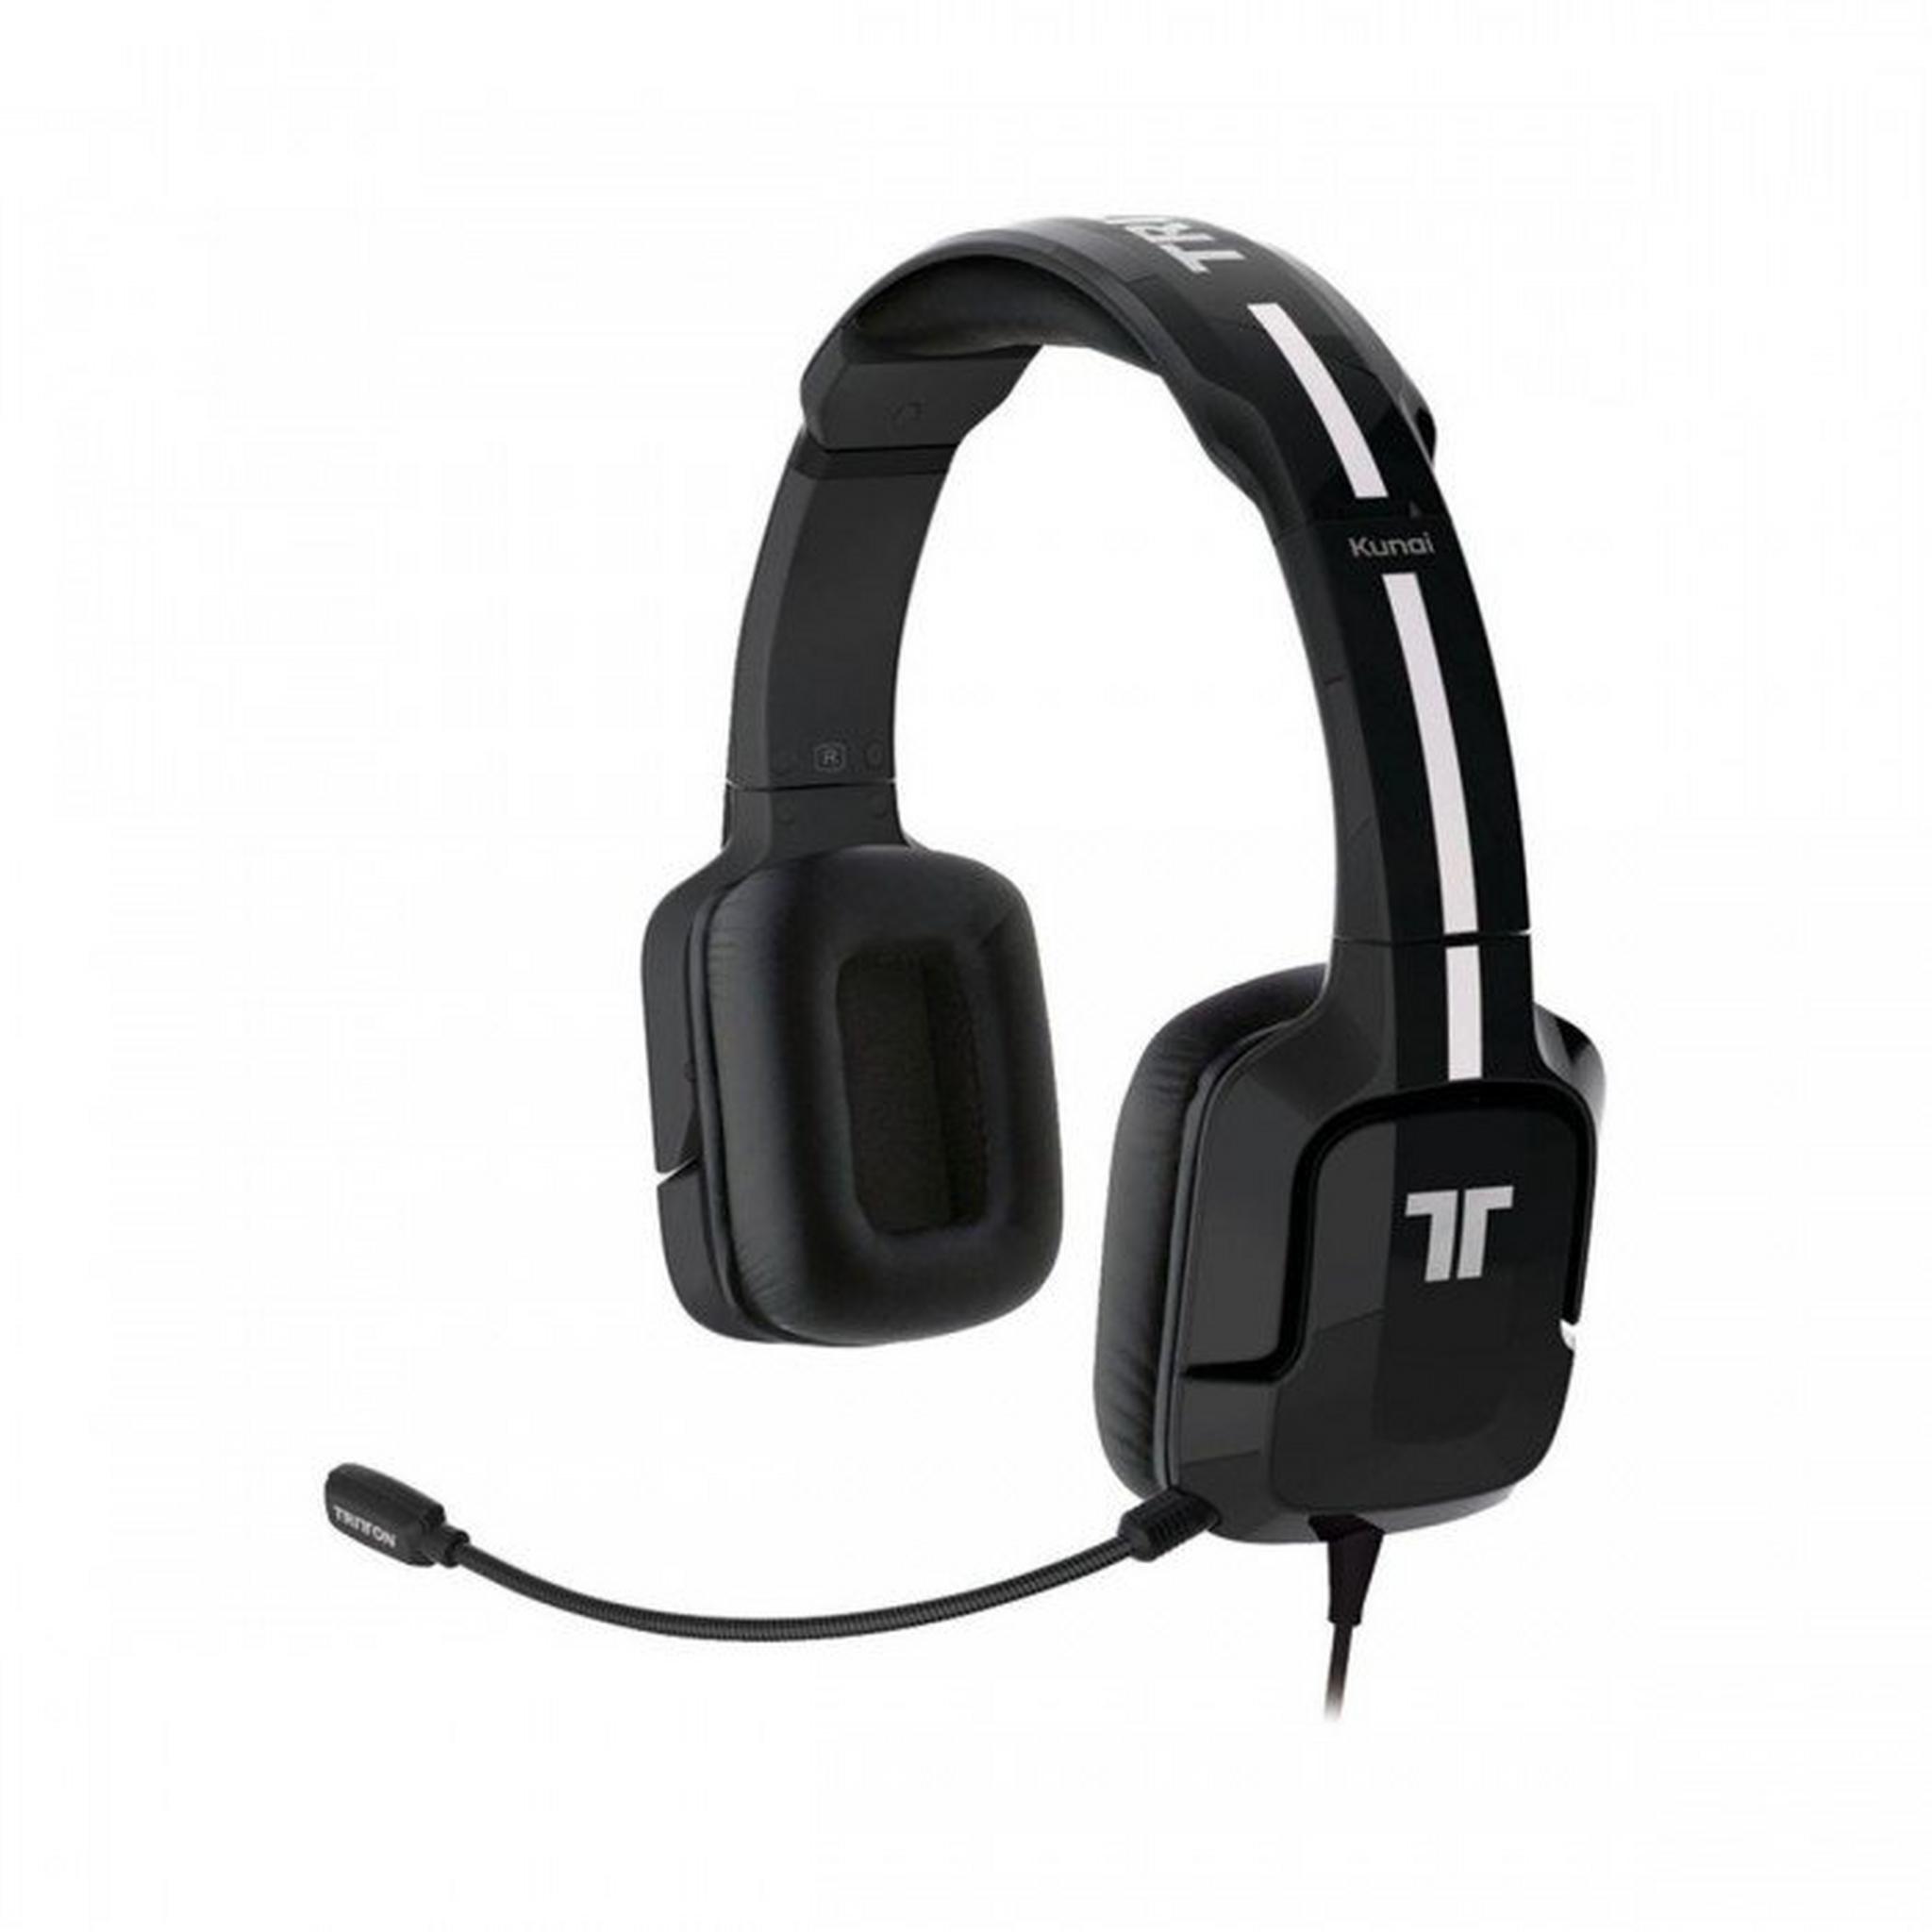 Sony Tritton Kunai Stereo Gaming Headphone + EQ Single Strap Backpack for up to 10-inch Tablet